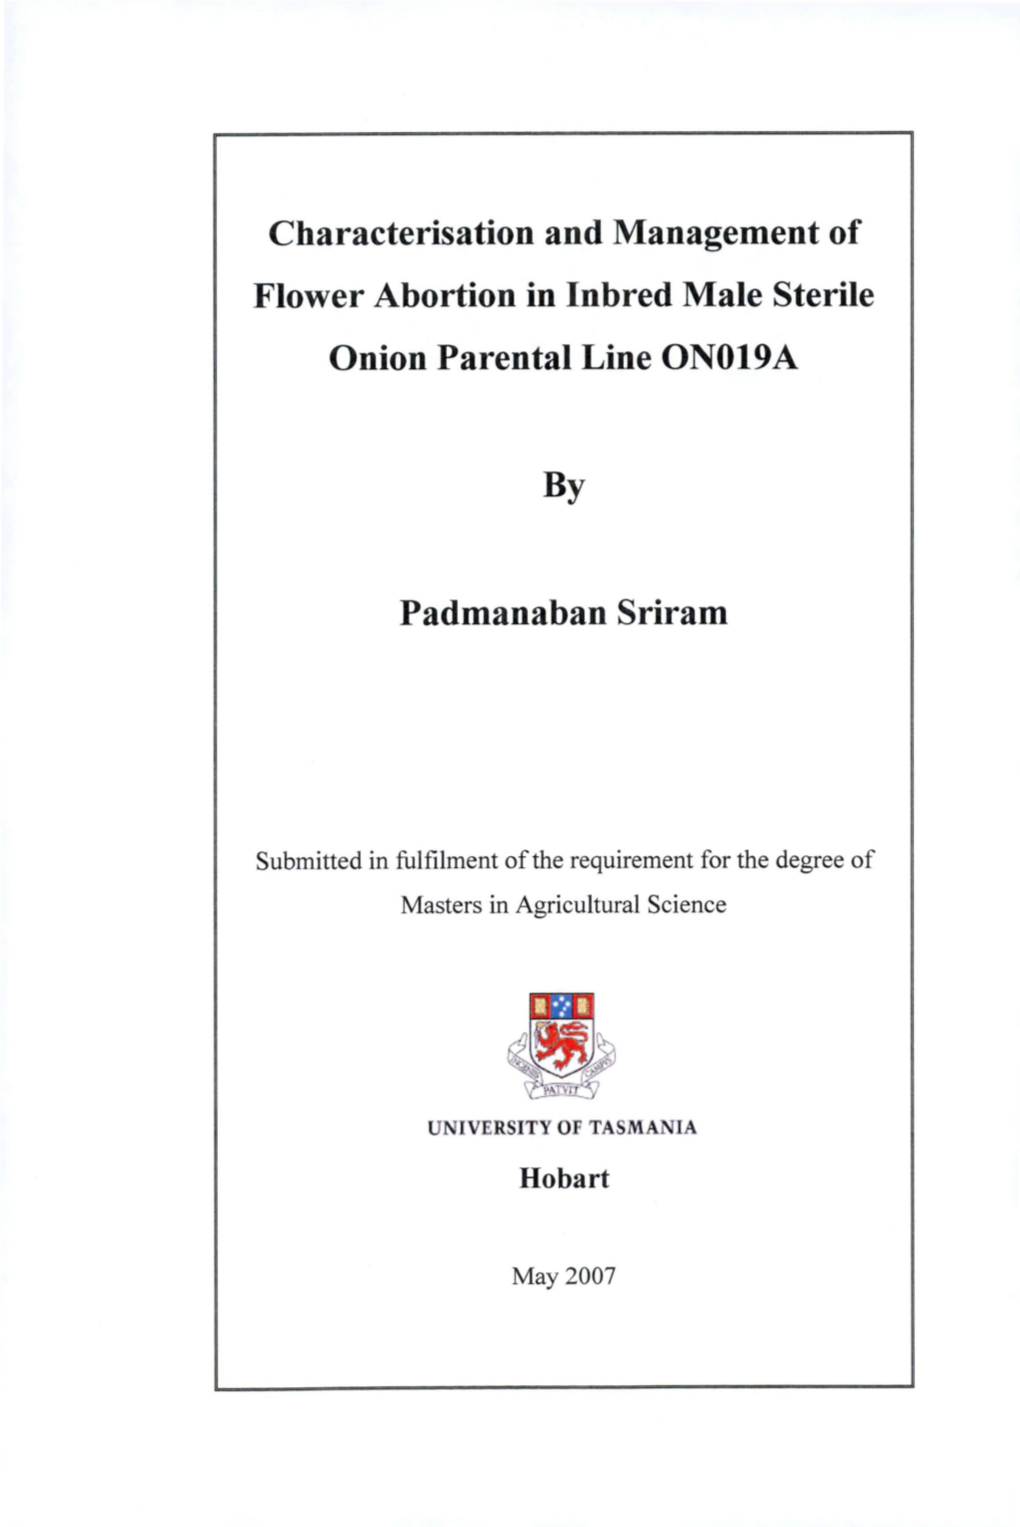 Characterisation and Management of Flower Abortion in Inbred Male Sterile Onion Parental Line ON019A